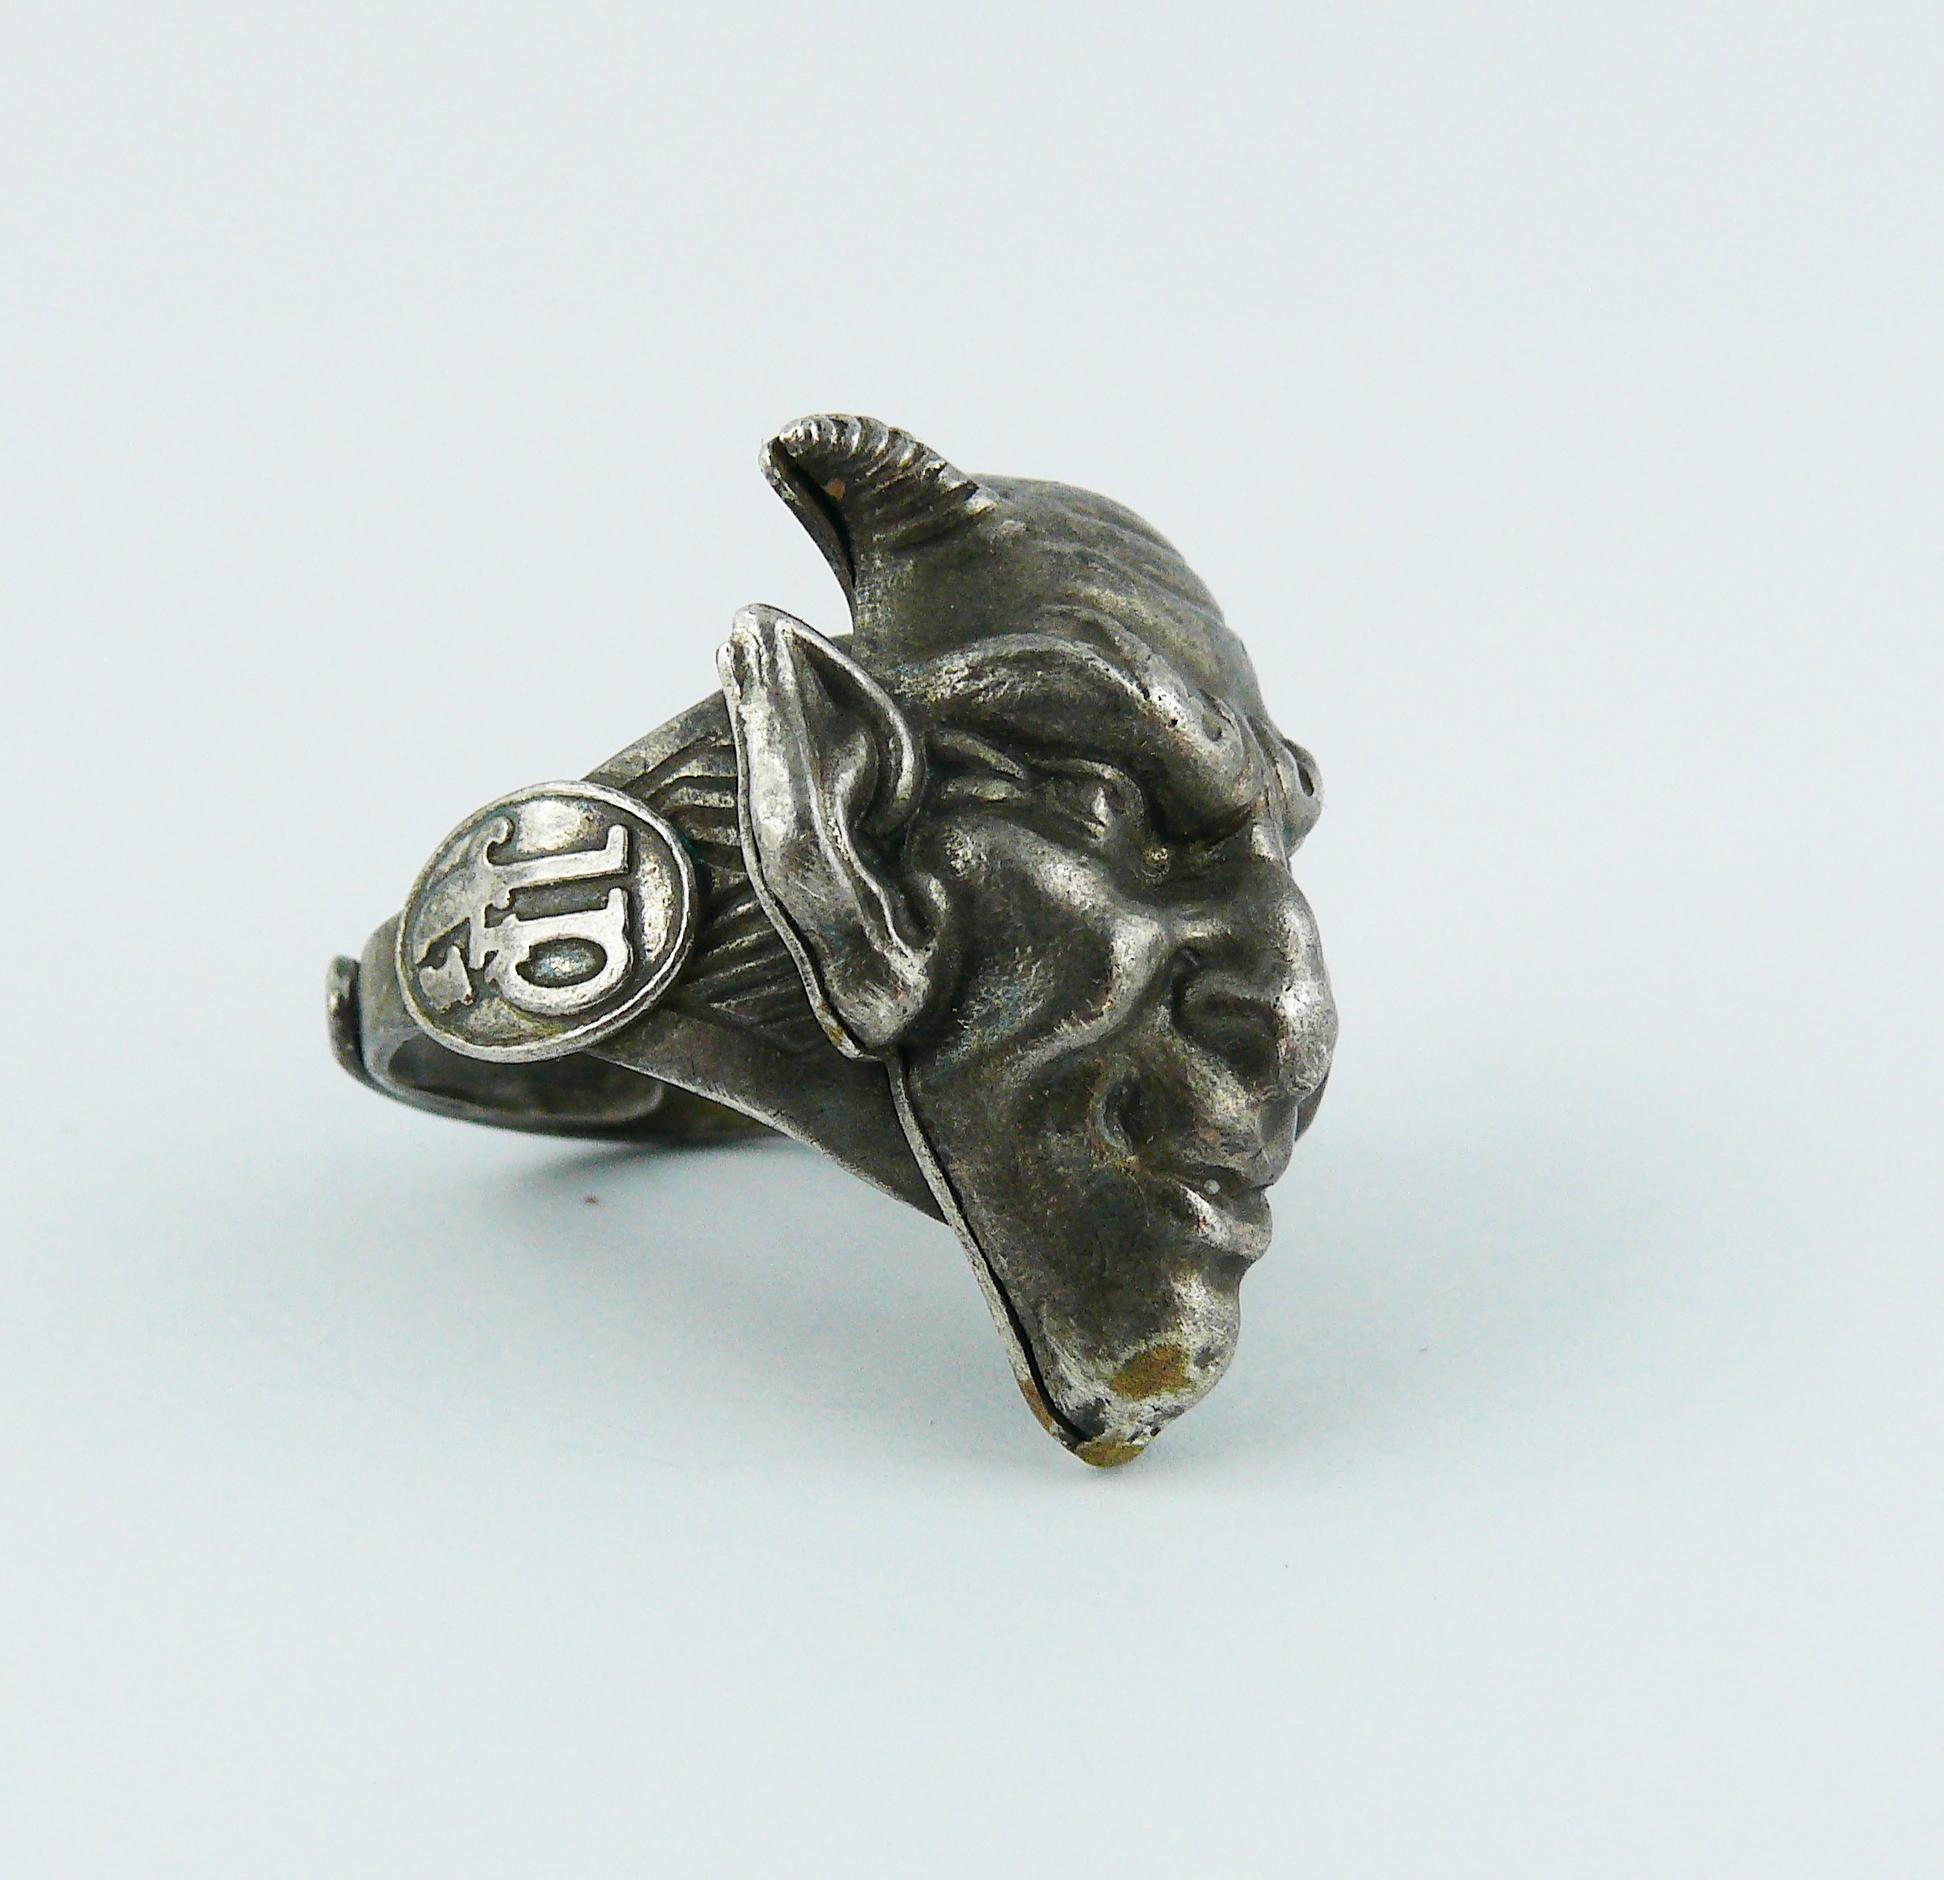 JEAN PAUL GAULTIER vintage antiqued silver toned ring featuring a demon head.

From the Fall/Winter 1994 Collection MONGOLE.

Marked JPG.

Adjustable size.

Indicative measurements : demon head approx. 2.5 cm x 2 cm (0.98 inch x 0.79 inch).

JEWELRY